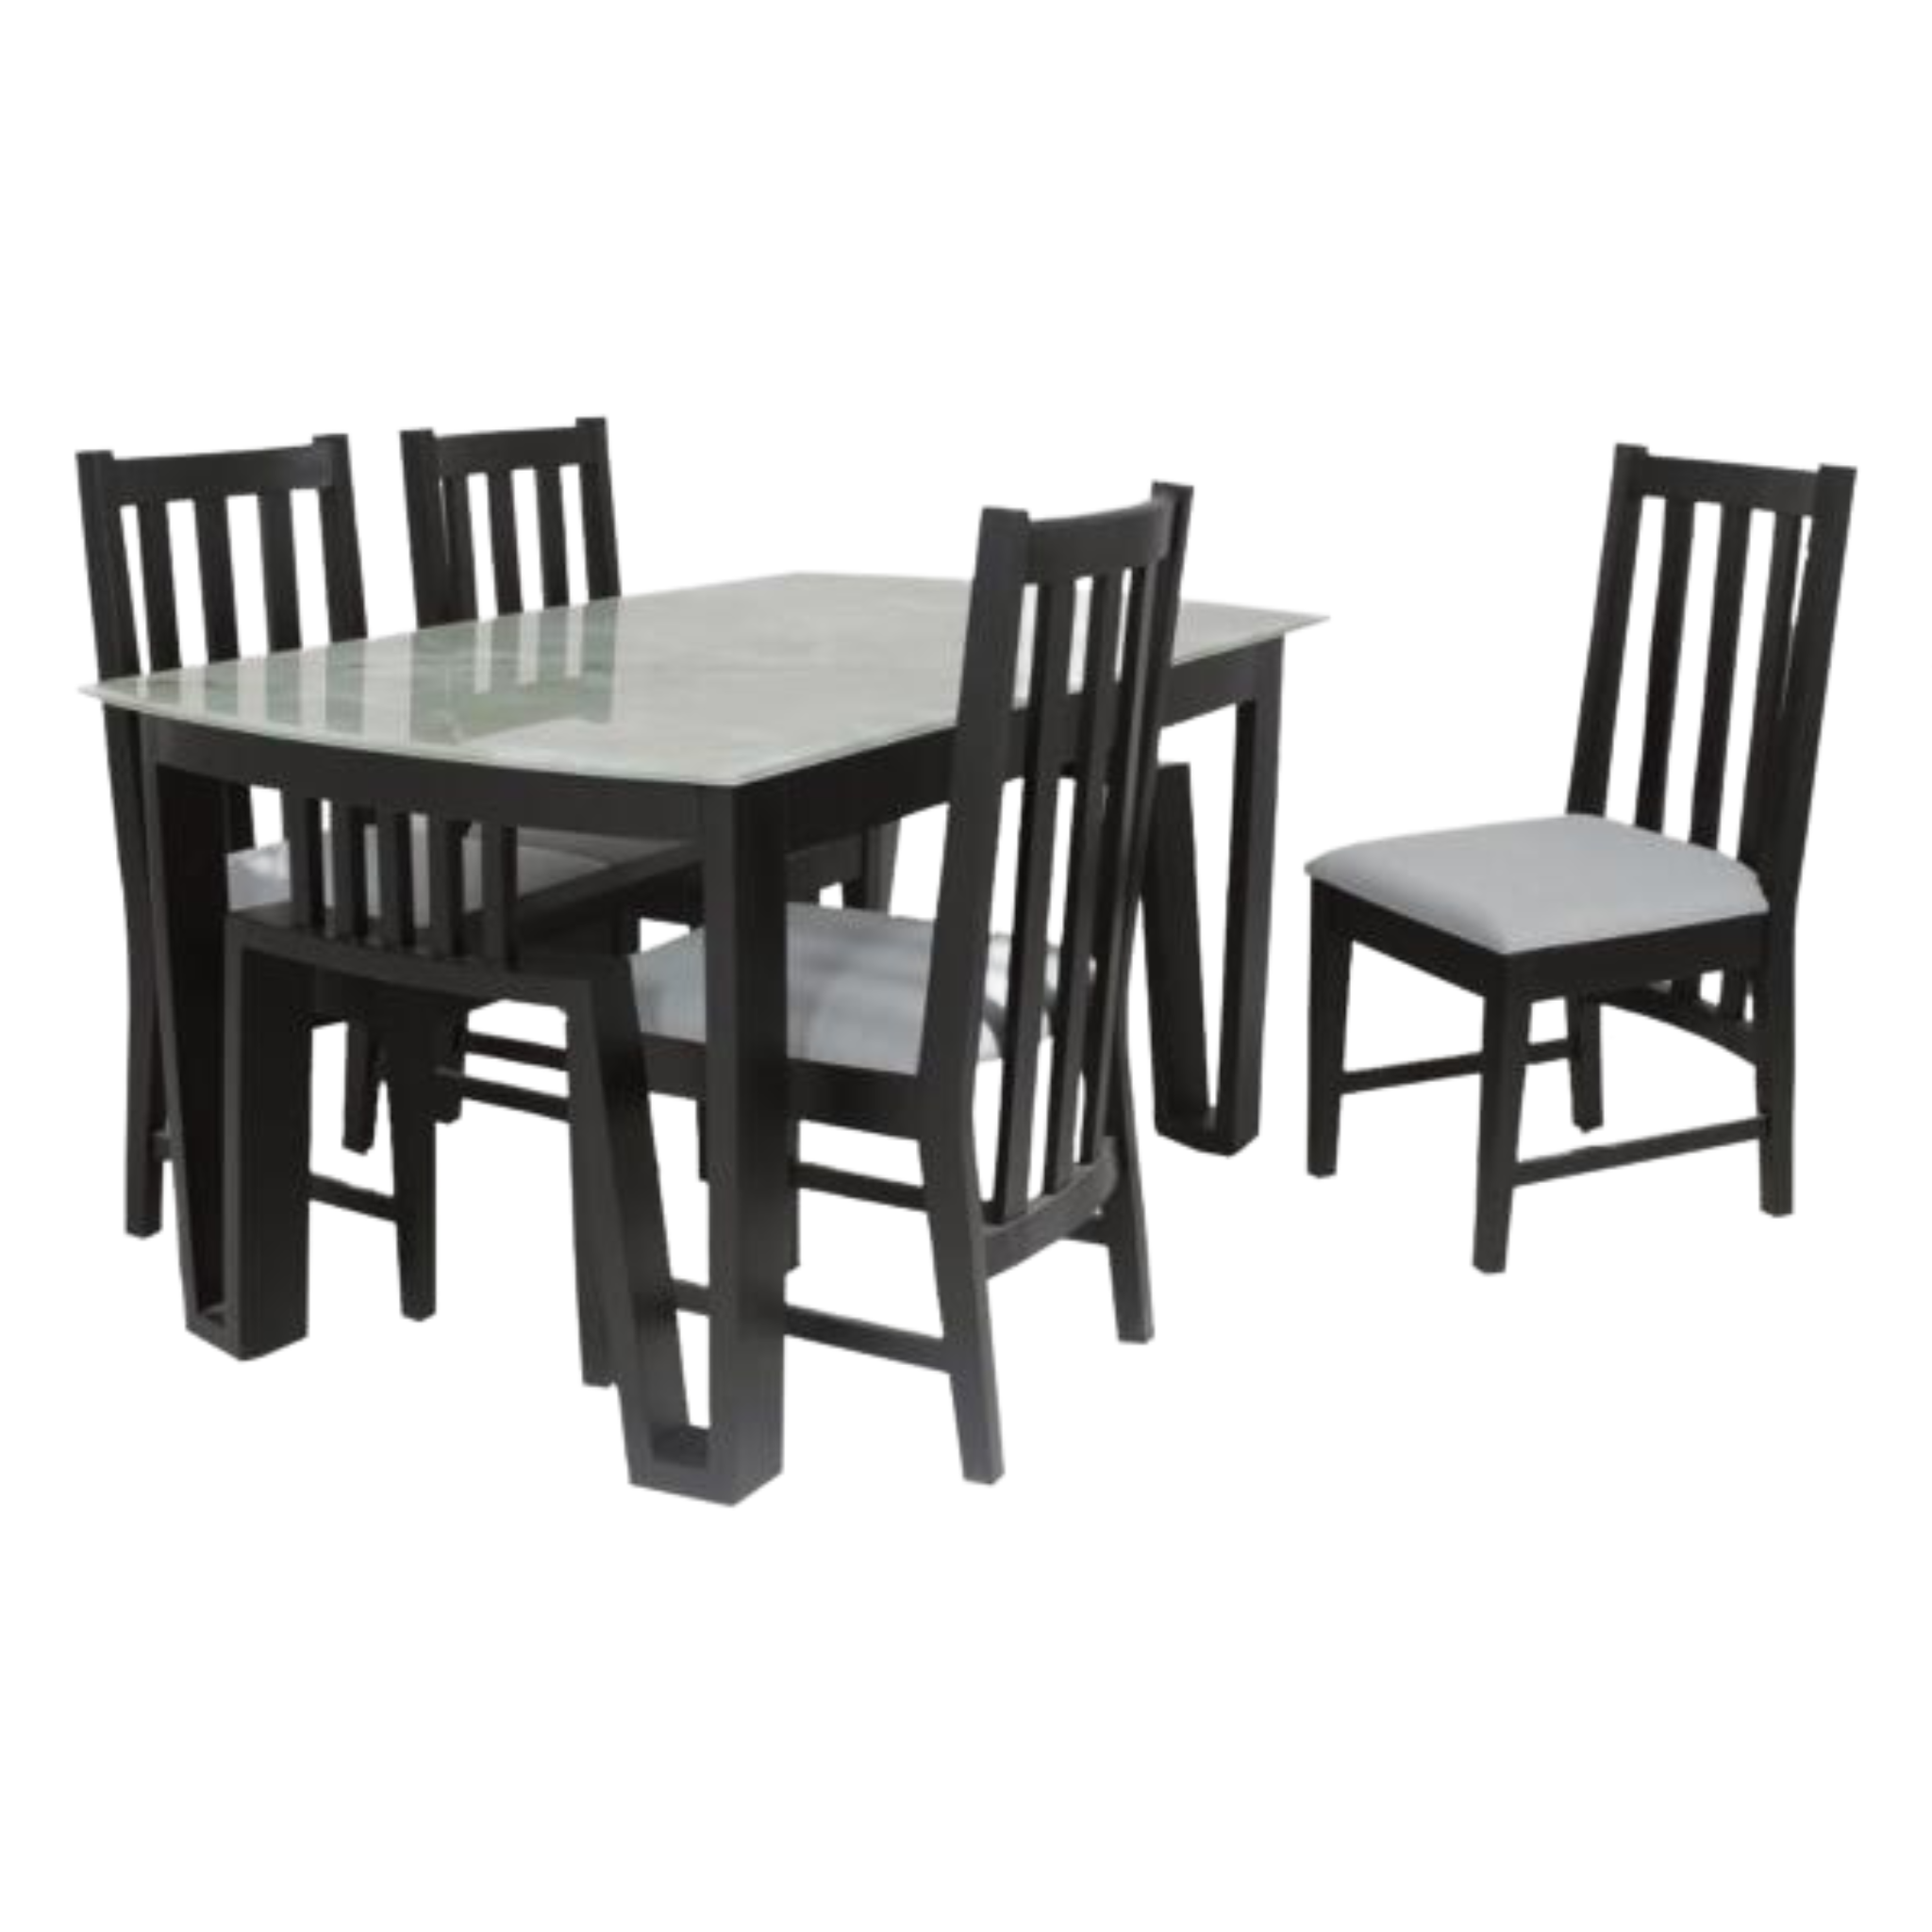 Dusk Rubber wood Dining Table